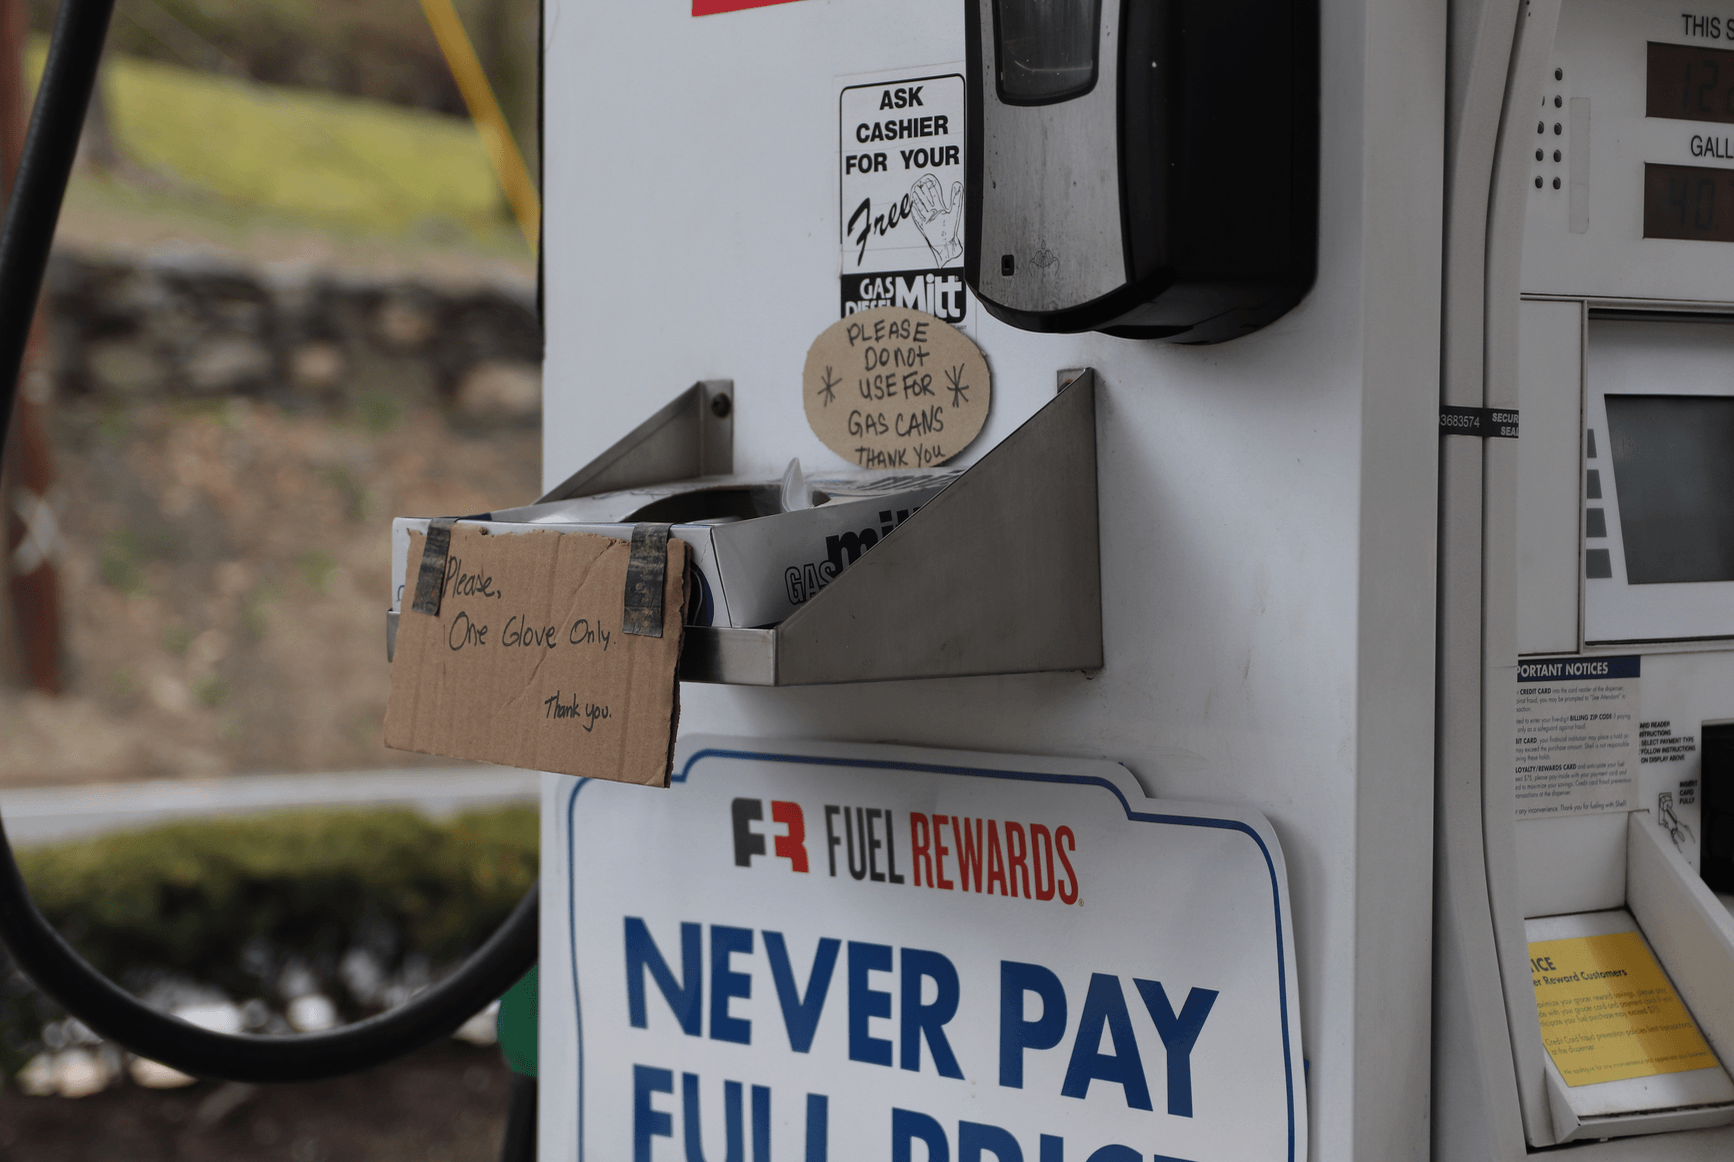 Customers at Single-use gas mitts at Glenville Shell. Photo: Leslie Yager